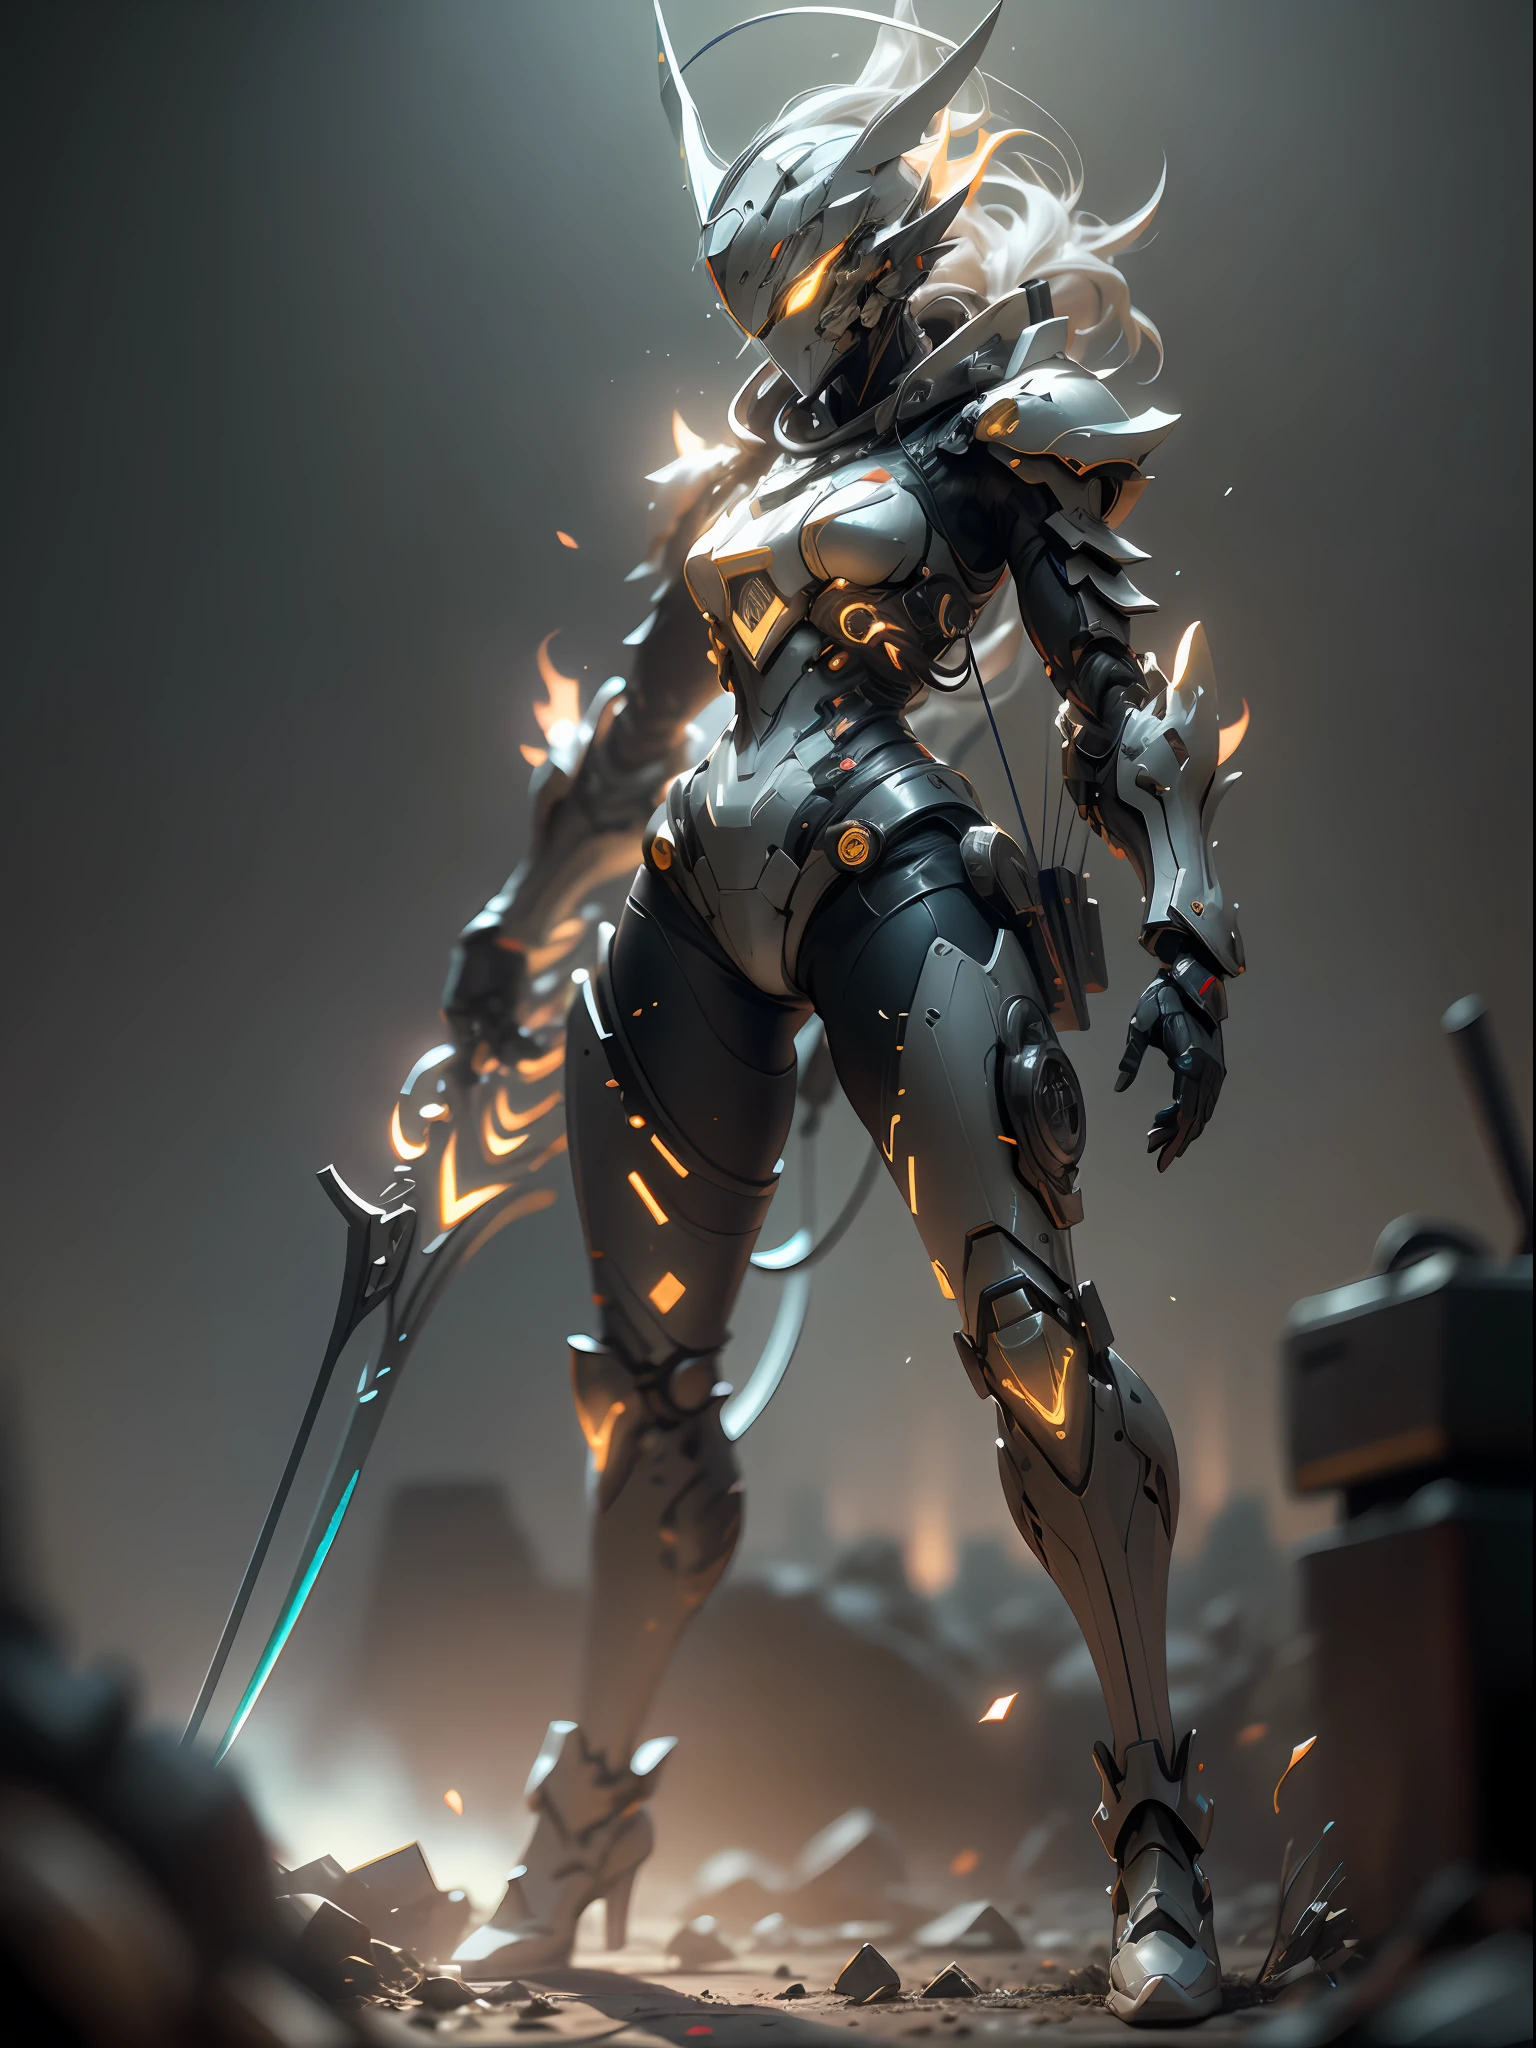 Ghost shooter with huge bow and arrow, super cool ghost shooter, wearing orange mechanical armor, huge bow and arrow, arrow feathers, open bow and arrow pose, tall, tall body, perfect body proportions, super detail, IP by pop mart, edge light, avatar, octane rendering, blender, full body, clean black background, 3d, c4d, best quality, very detailed, ancient technology, HDR (high dynamic range), ray tracing, nvidia RTX, super resolution, unreal 5, Subsurface Scattering, PBR Texture, Post Processing, Anisotropic Filtering, Depth of Field, Maximum Sharpness and Acutance, Multilayer Texture, Albedo and Highlight Mapping, Surface Shading, Accurate Simulation of Light-Material Interactions, Perfect Proportions, Octane Rendering, Duotone Illumination, Low ISO, White Balance, Rule of Thirds, Wide Aperture, 8K RAW, High Efficiency Sub-Pixel, Subpixel Convolution, Glowing Particles, Light Scattering, Tyndall Effect